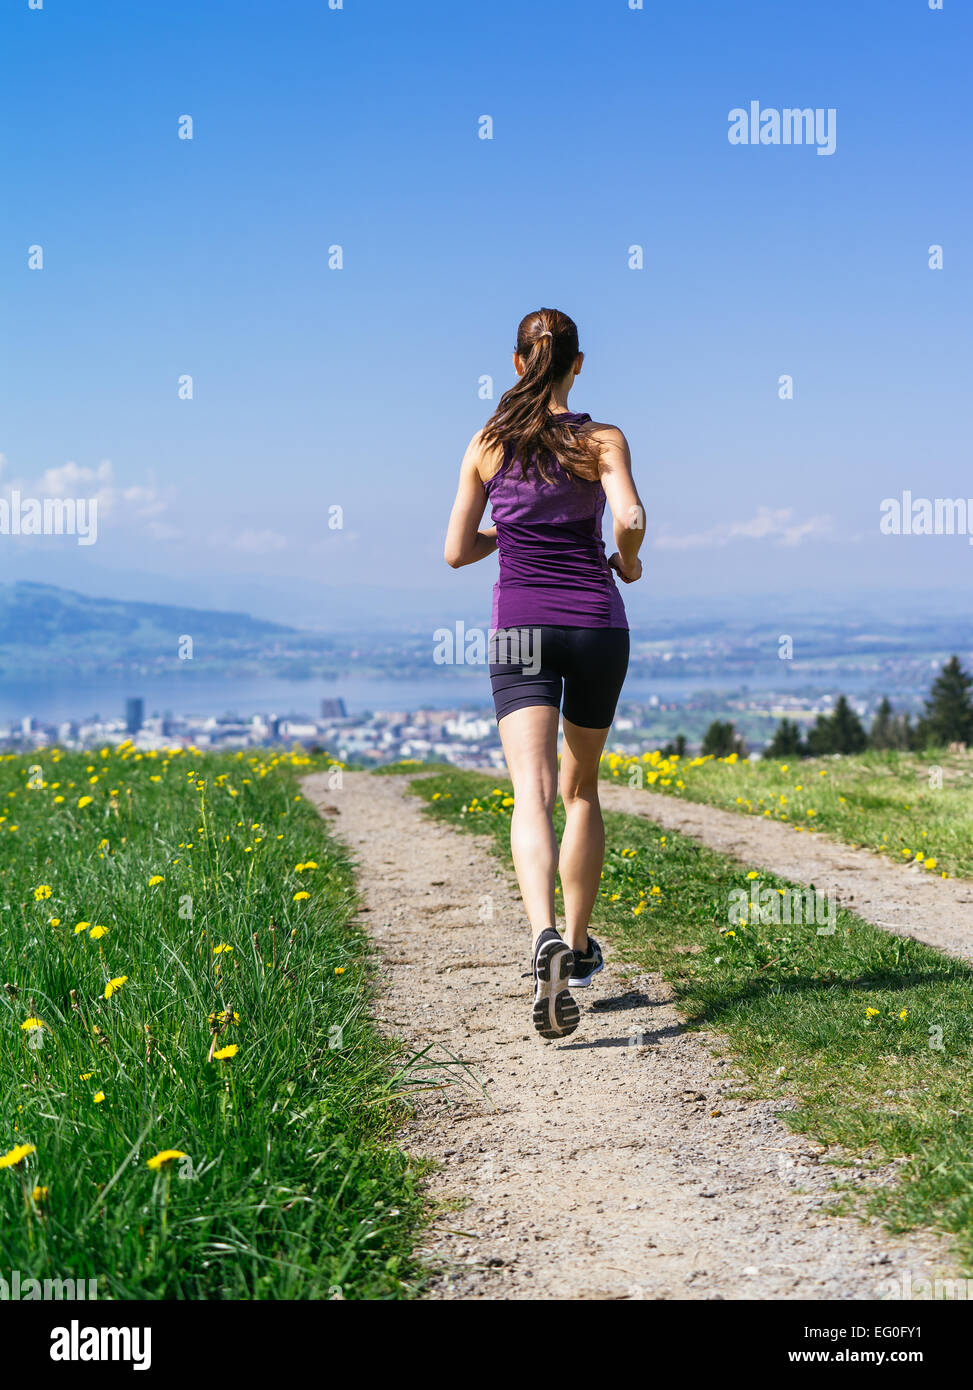 Photo of a young woman jogging and exercising on a country path.  Lake and city in the distance. Slight motion blur visible. Stock Photo